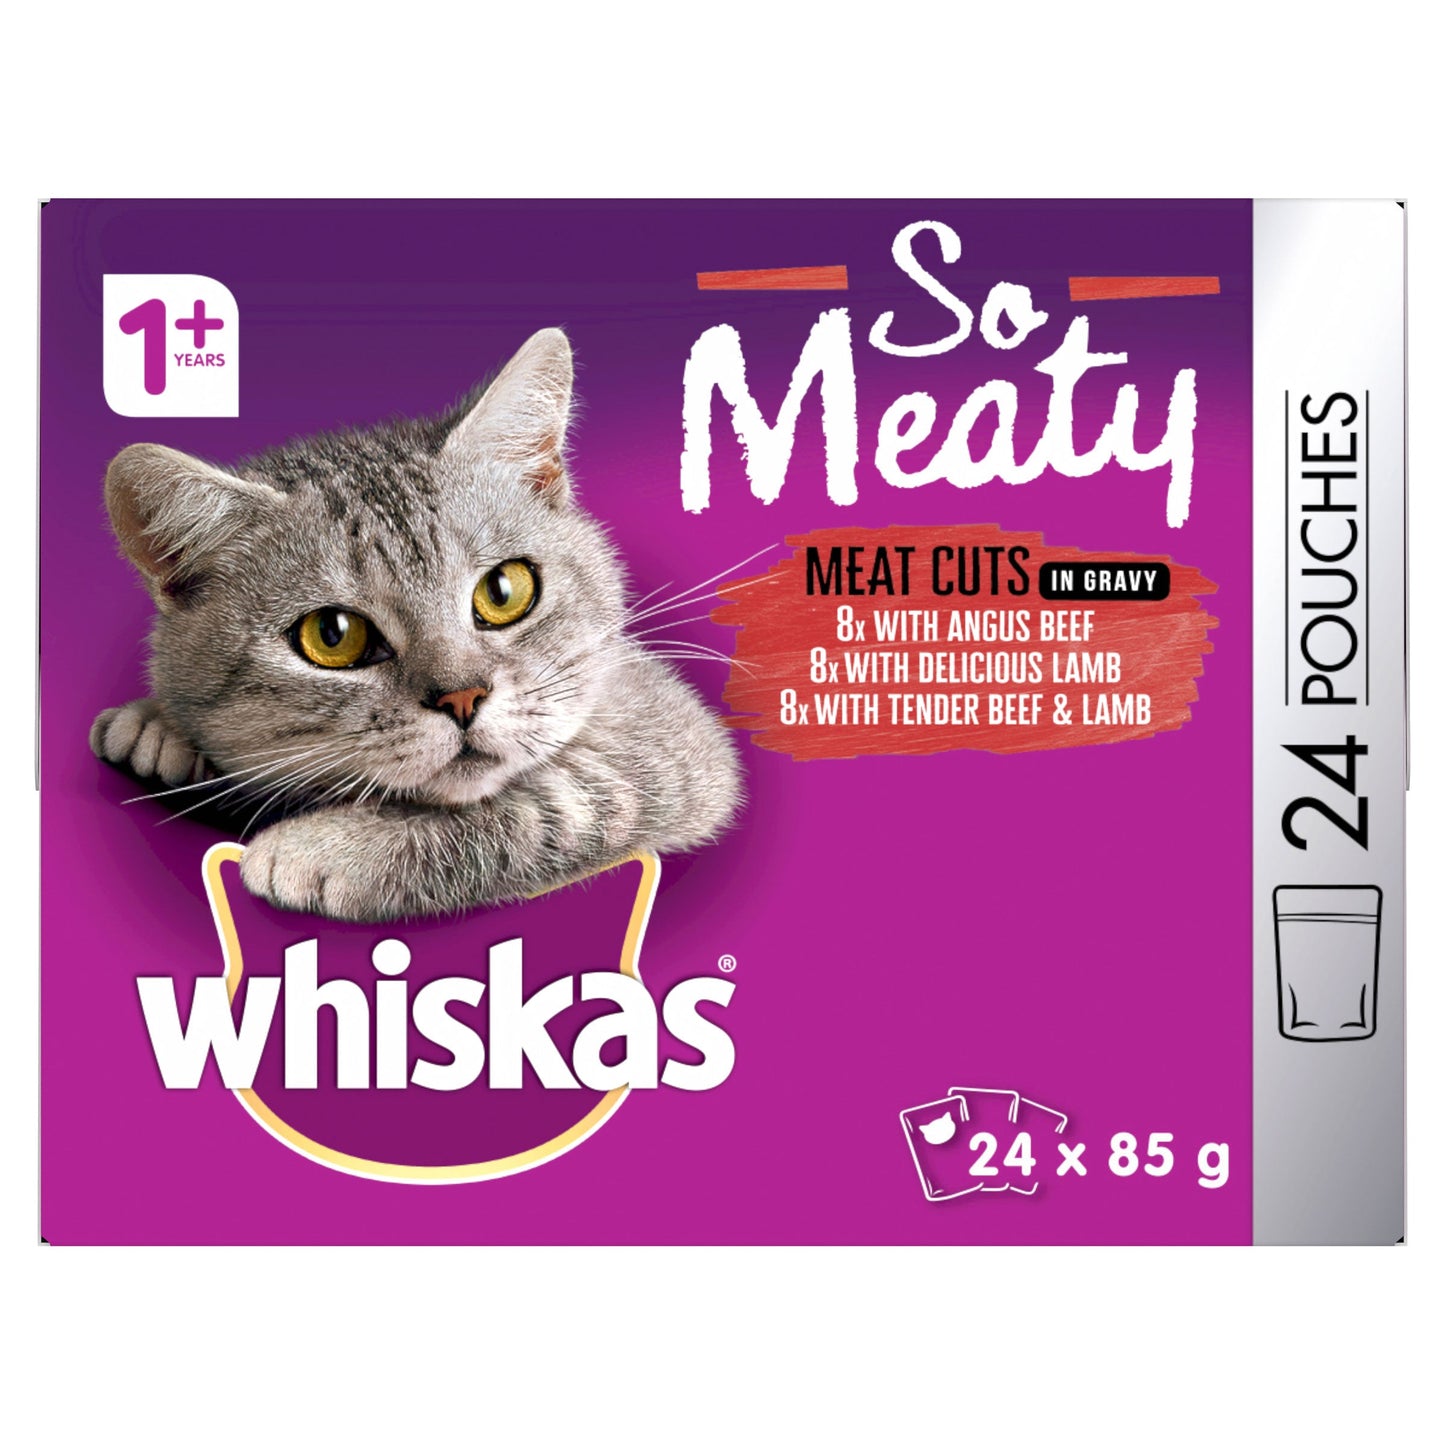 Whiskas So Meaty Adult Wet Cat Food Meat Cuts In Gravy 24x85g Pouches